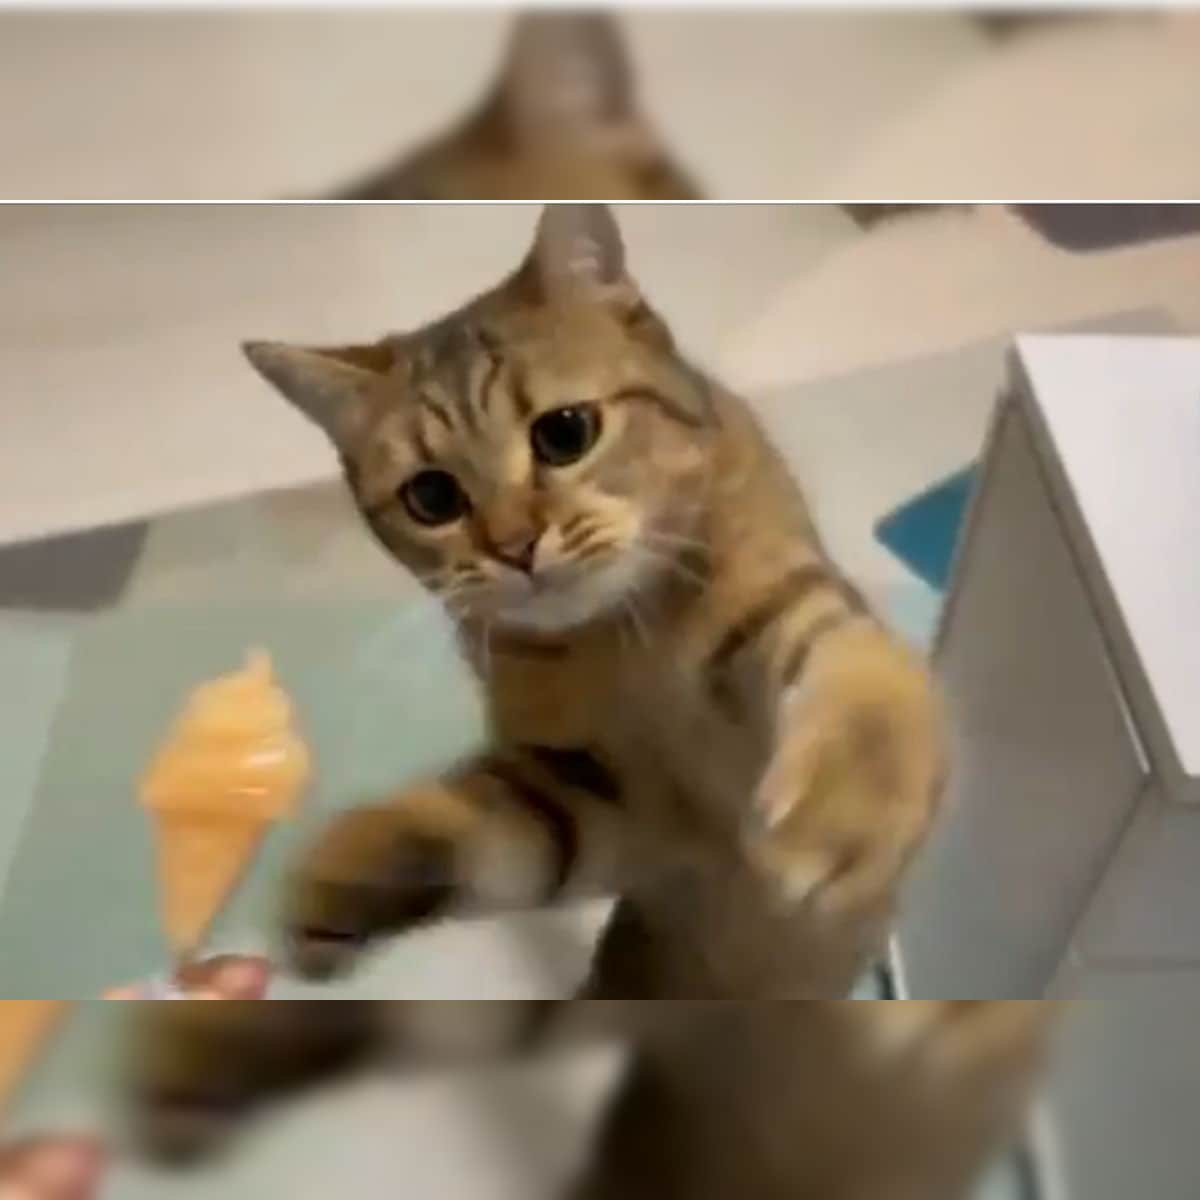 Watch This Cat Enjoying Its Summer Ice Cream Treat In Adorable Video Will Warm Your Heart